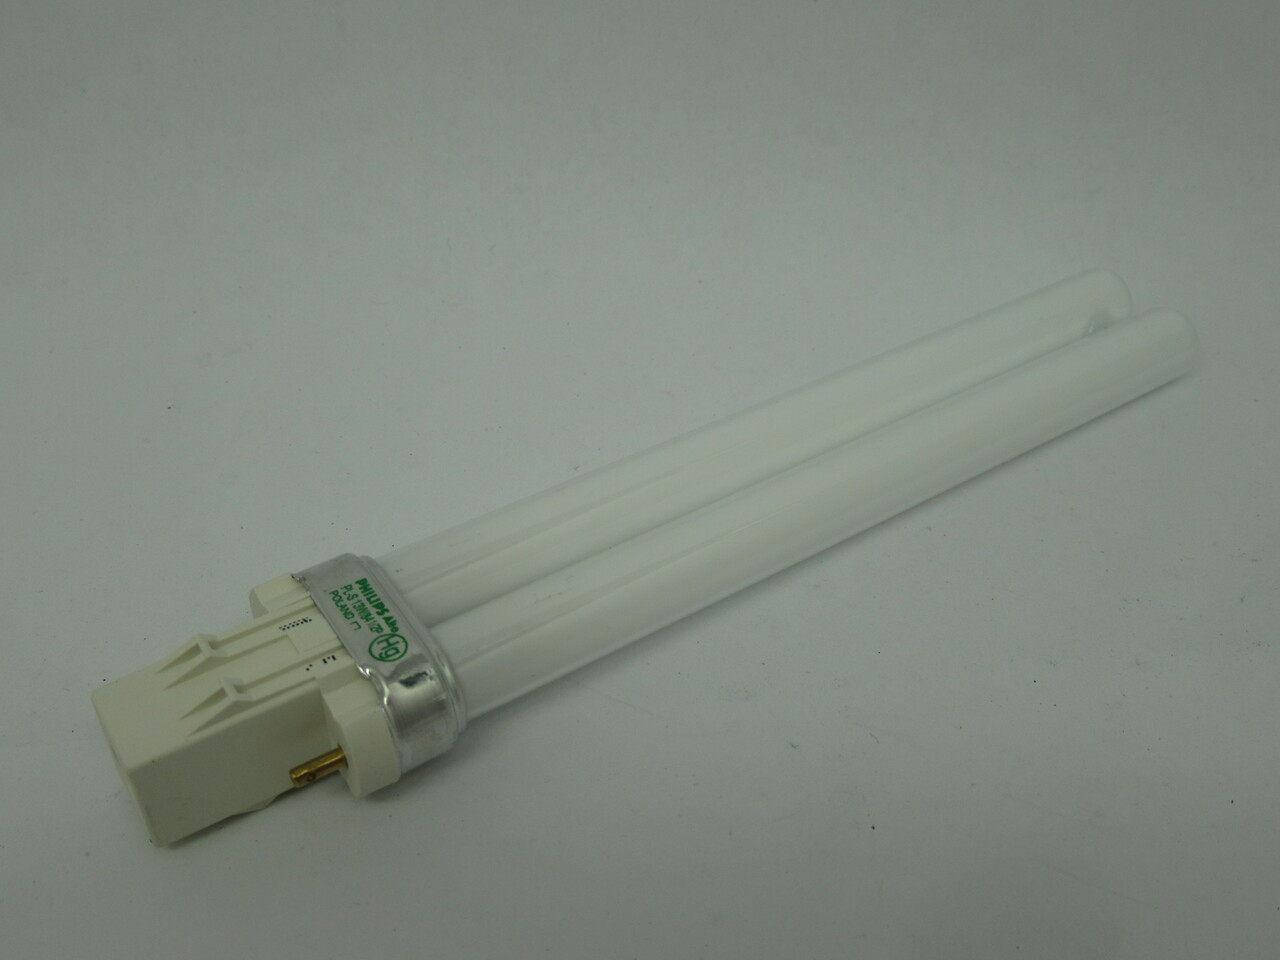 Philips PL-S-13W/841/2P GX23 Compact Fluorescent Lamp 13W 10,000Hrs. NEW